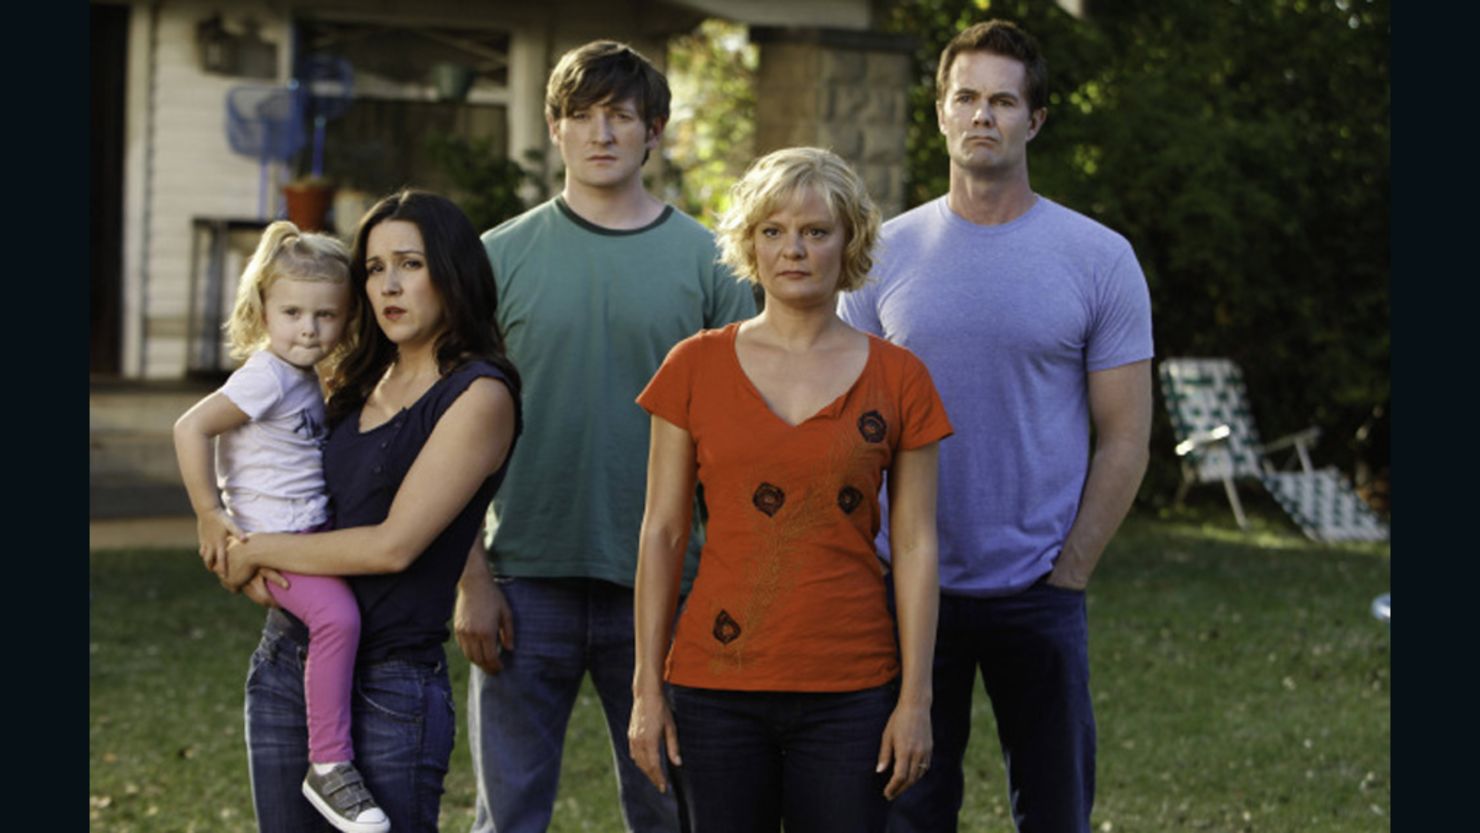 Martha Plimpton, second from right, who plays Virginia on "Raising Hope," will clean one fan's house to promote the Fox show.